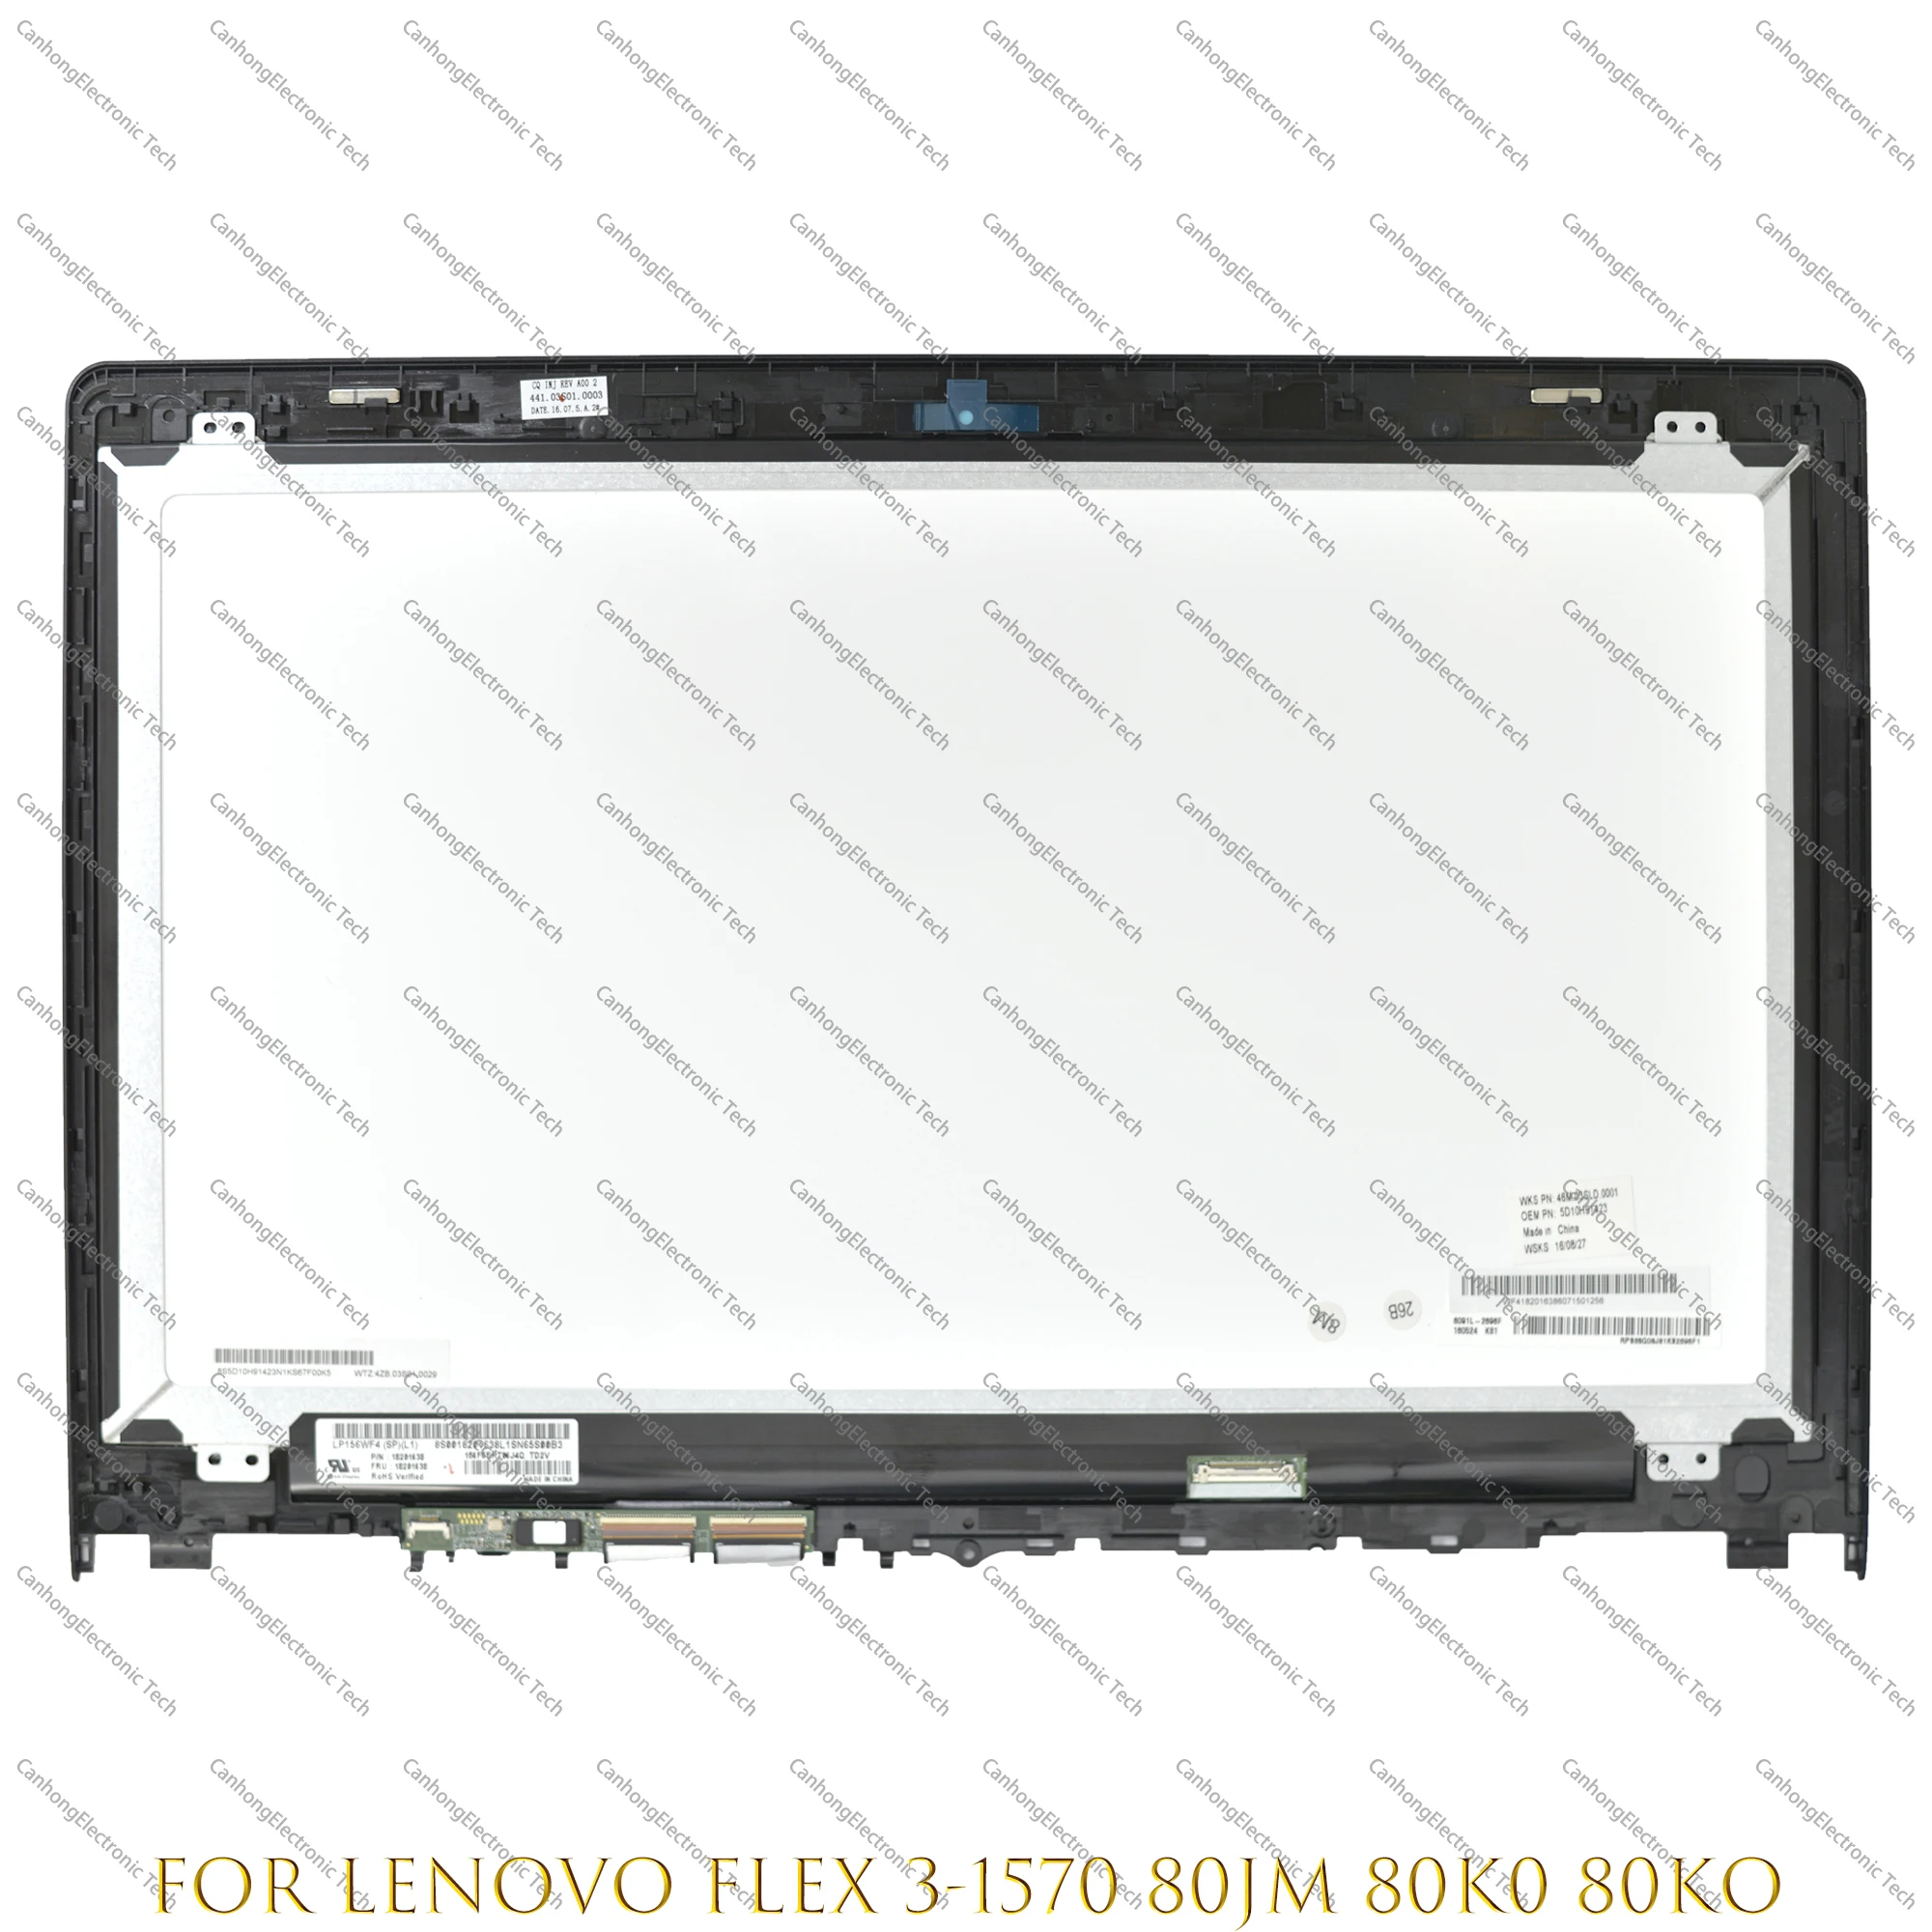 

LCD Touch Screen Digitizer Replacement Assembly With Frame 15.6-Inches FHD HD For Lenovo Flex 3-1580 80R4 3-1570 80JM 80K0 80KO